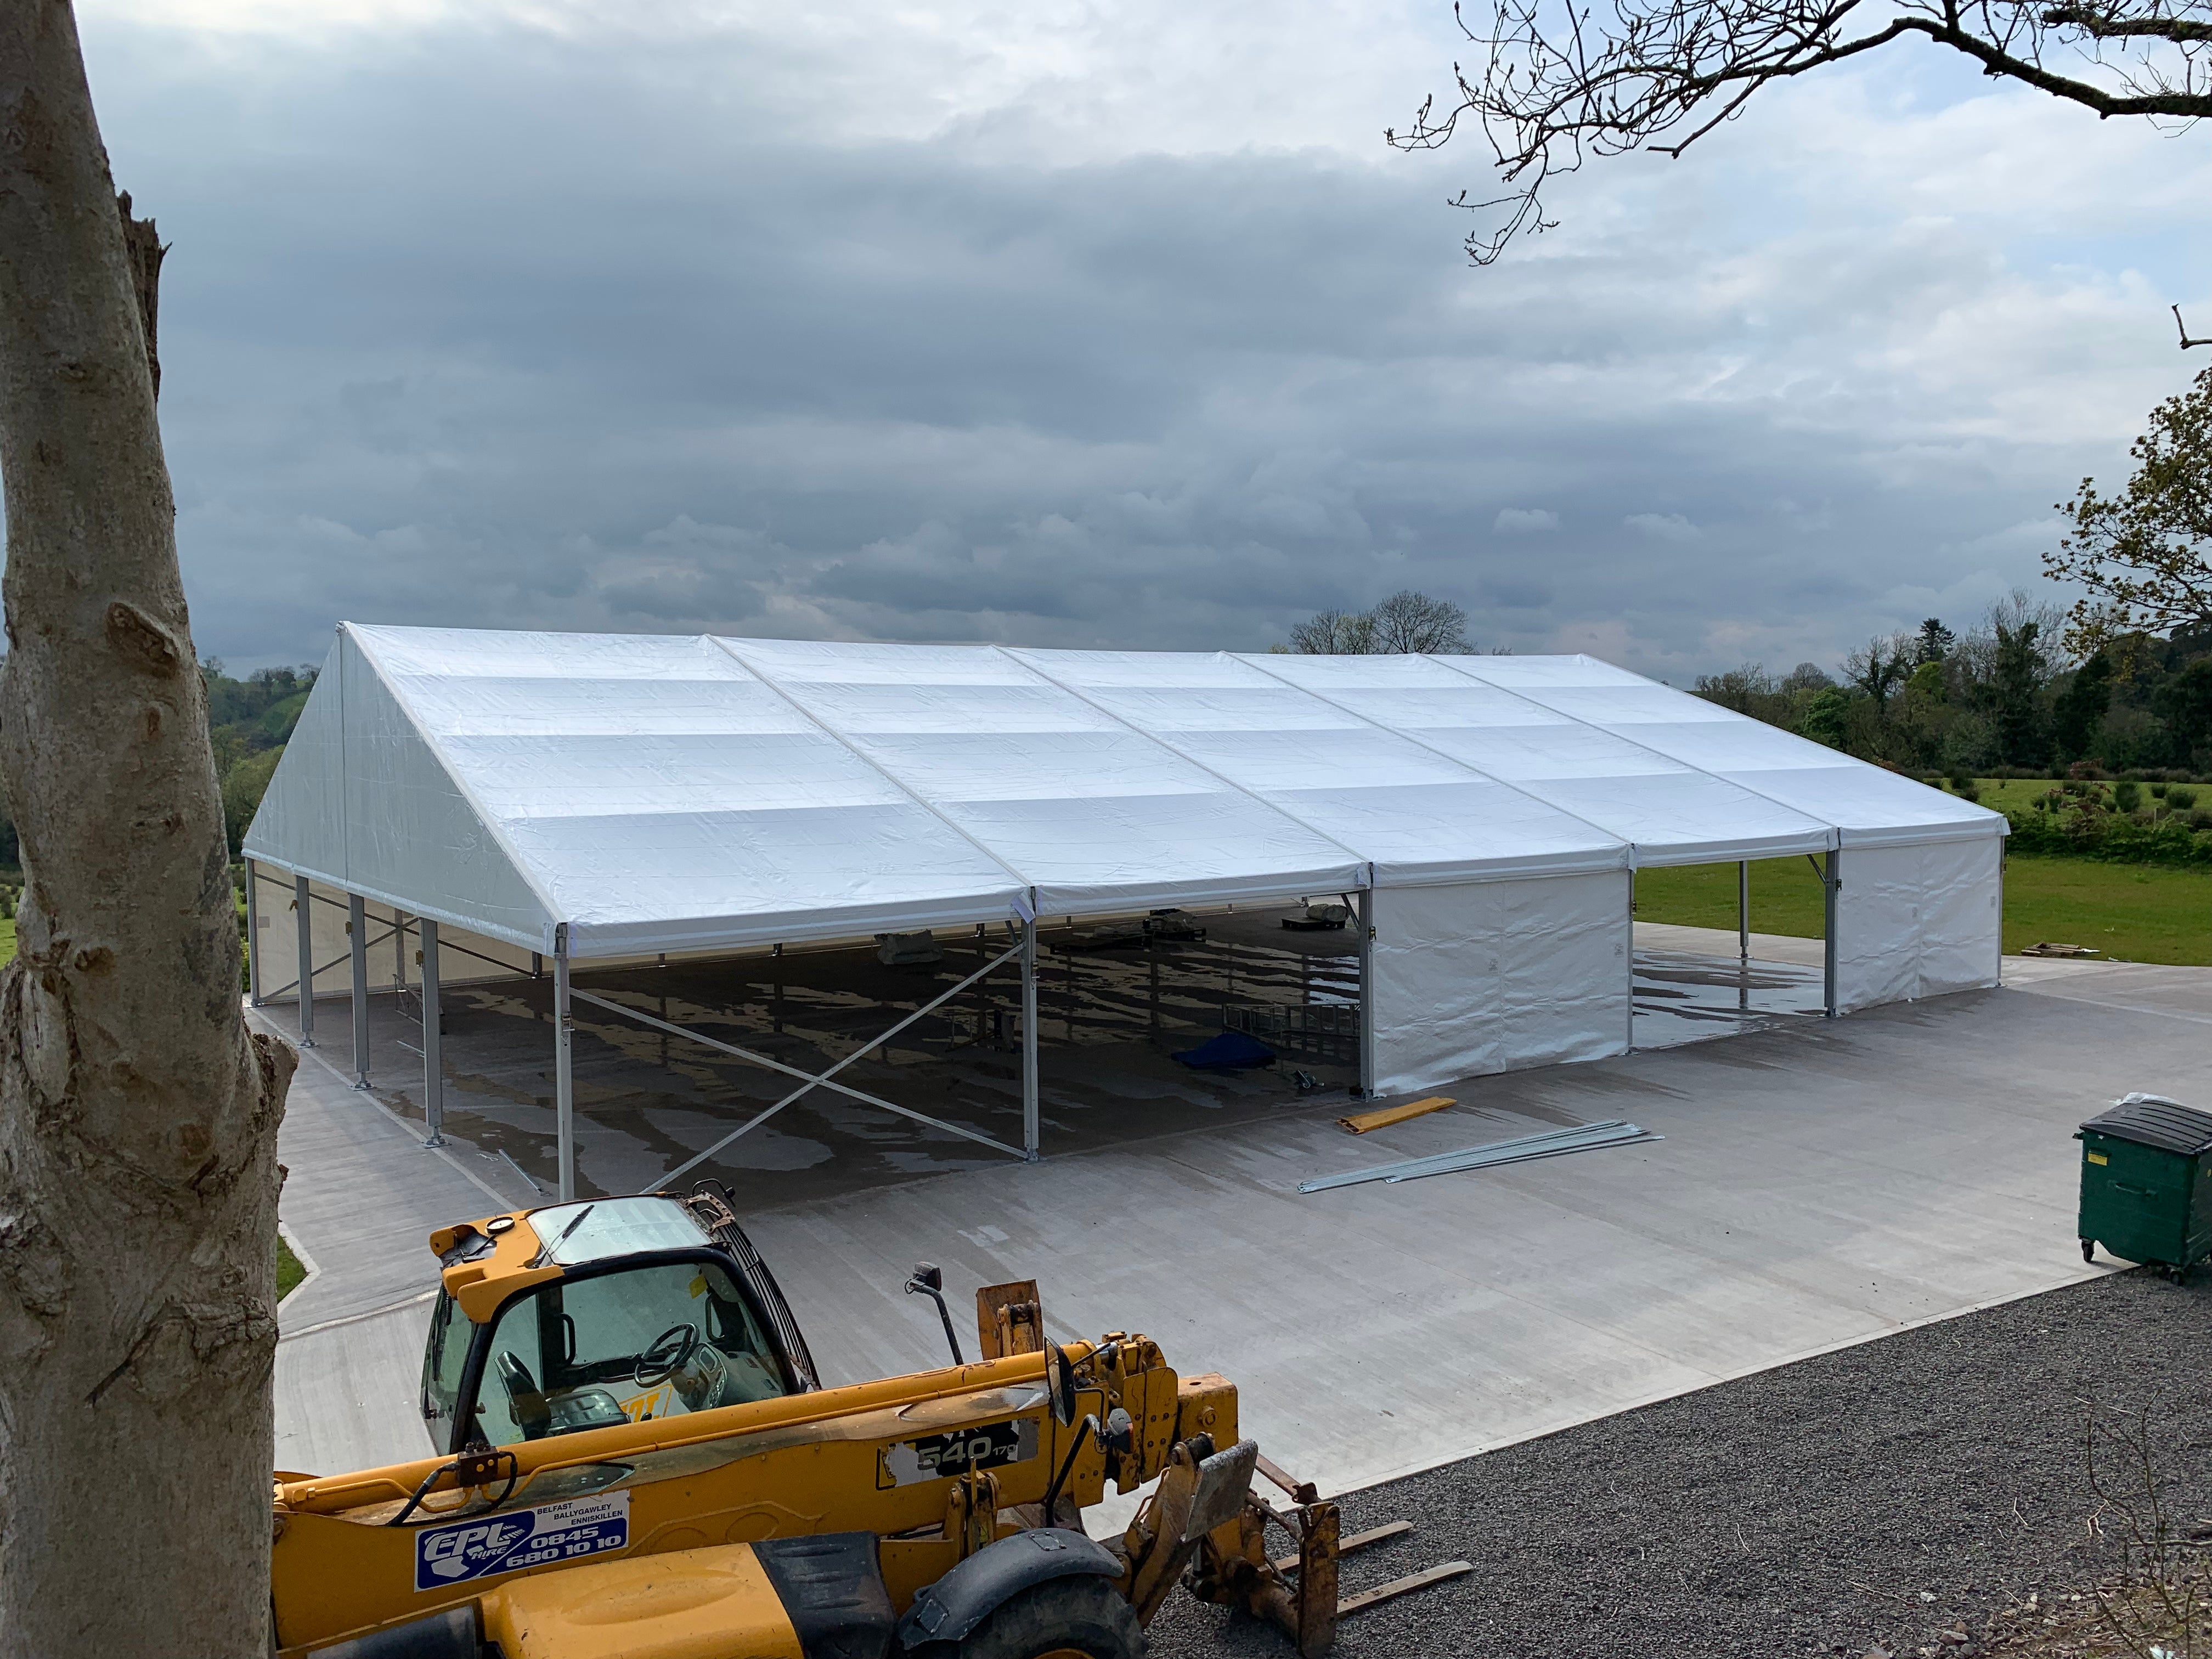 Clearspan Tent, 18M X 25M Plain Wall